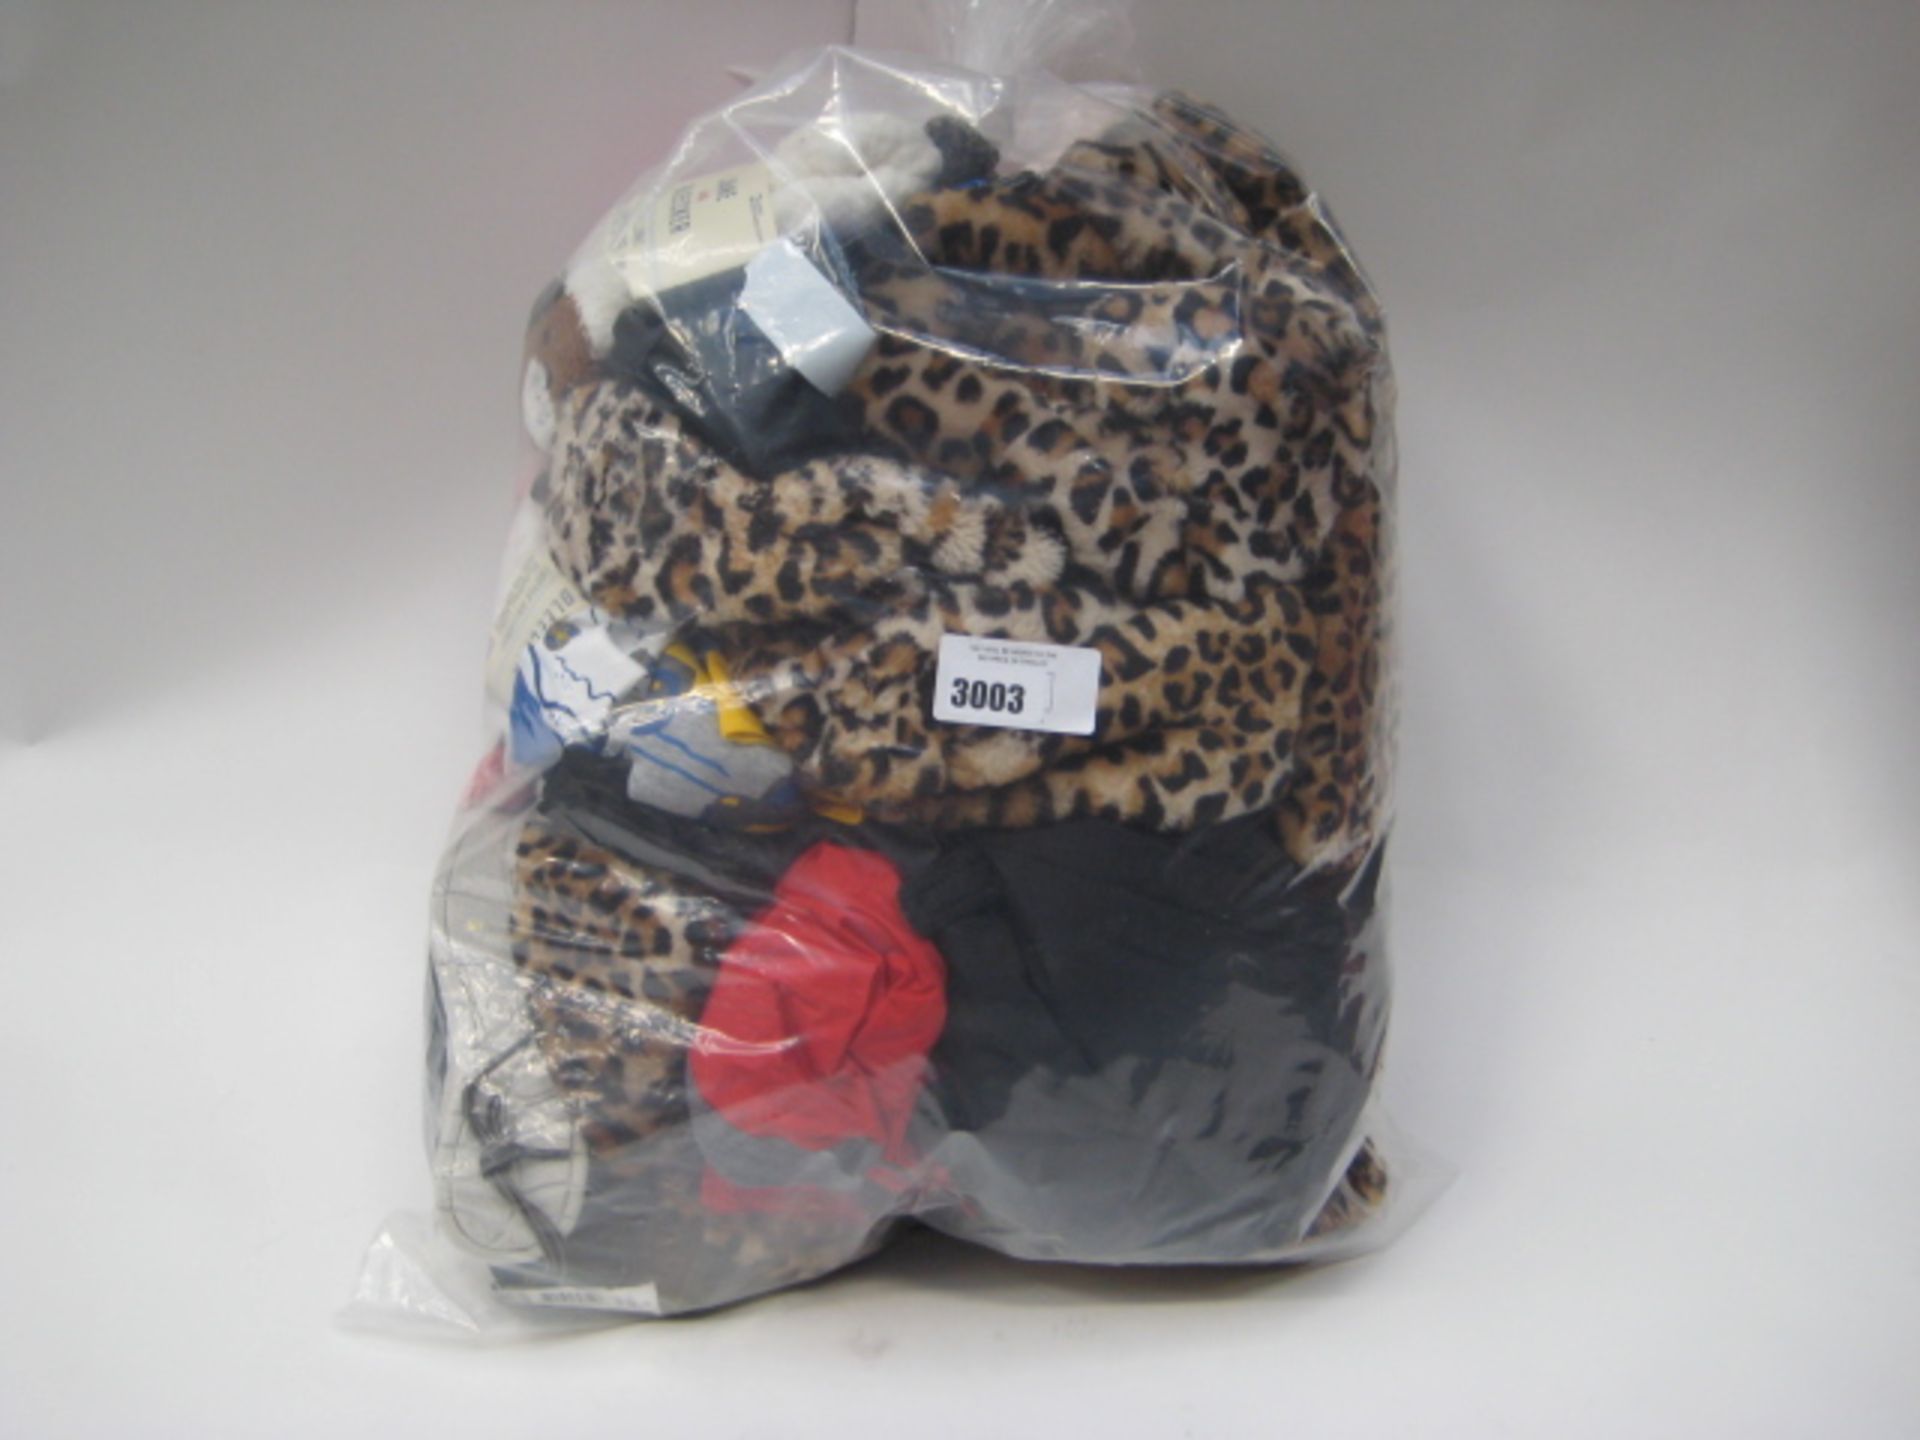 Bag containing childrens clothing to include 2 piece pyjama sets, animal print furry jackets, - Image 2 of 2